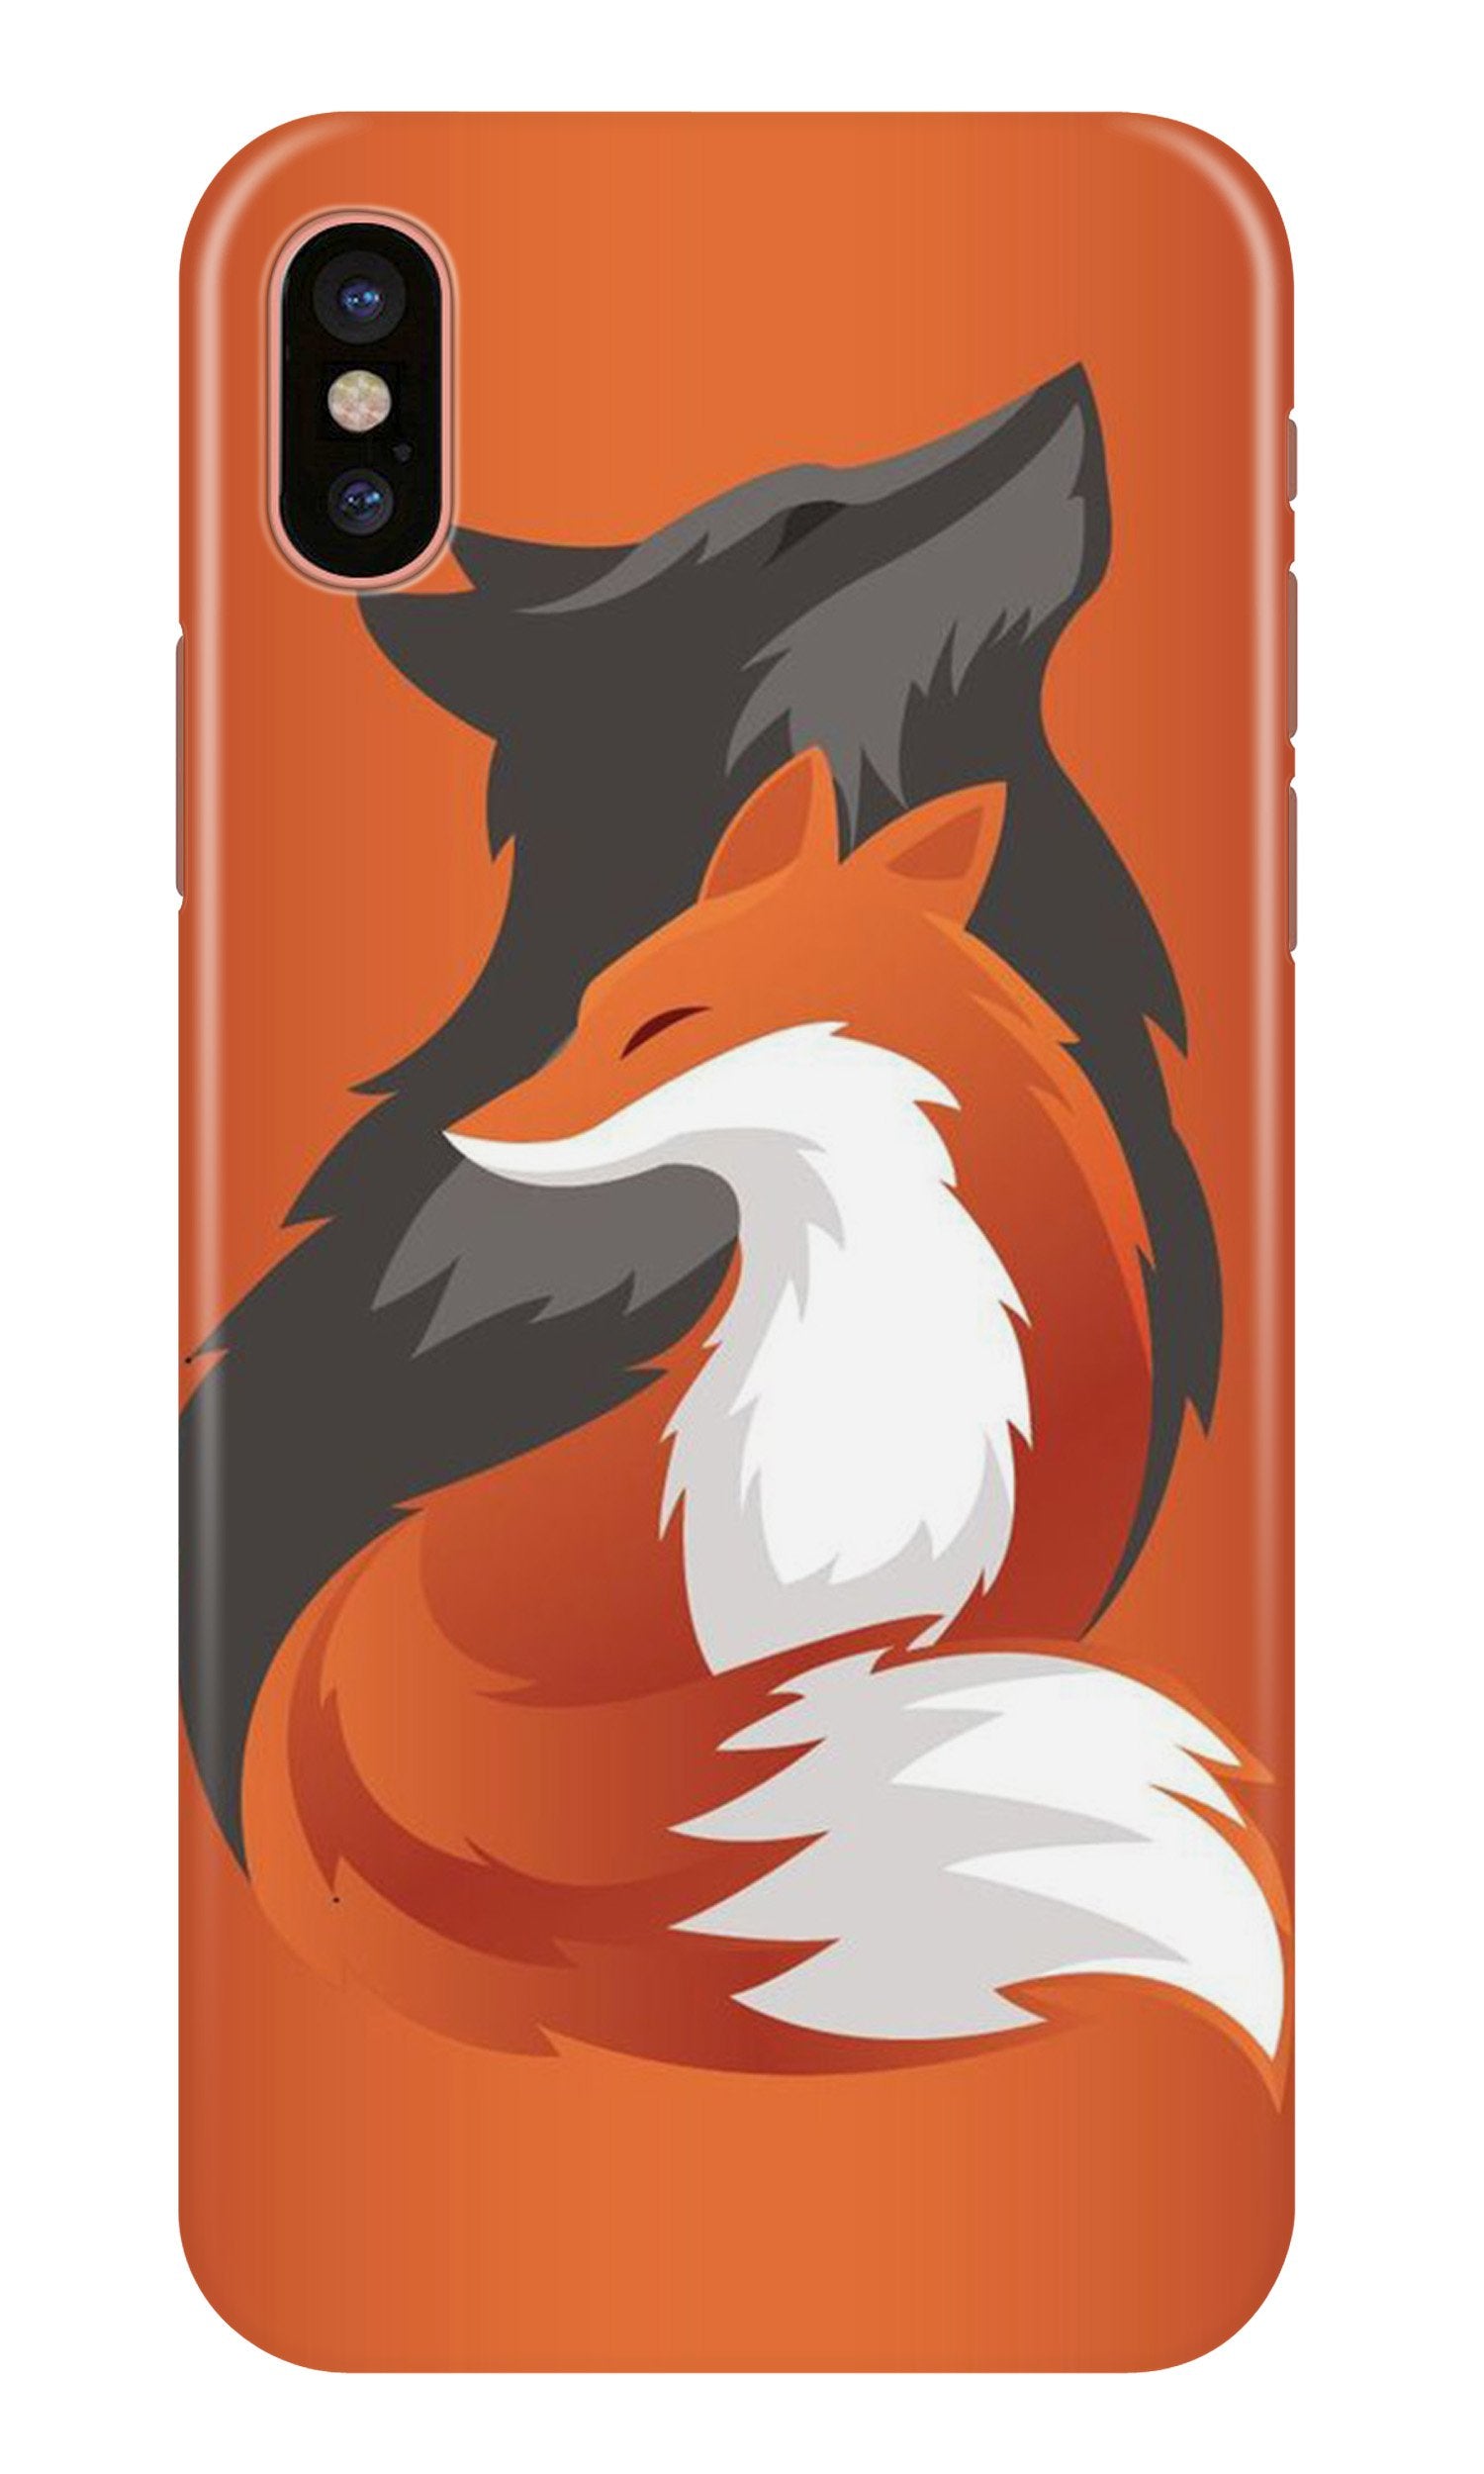 WolfCase for iPhone X (Design No. 224)